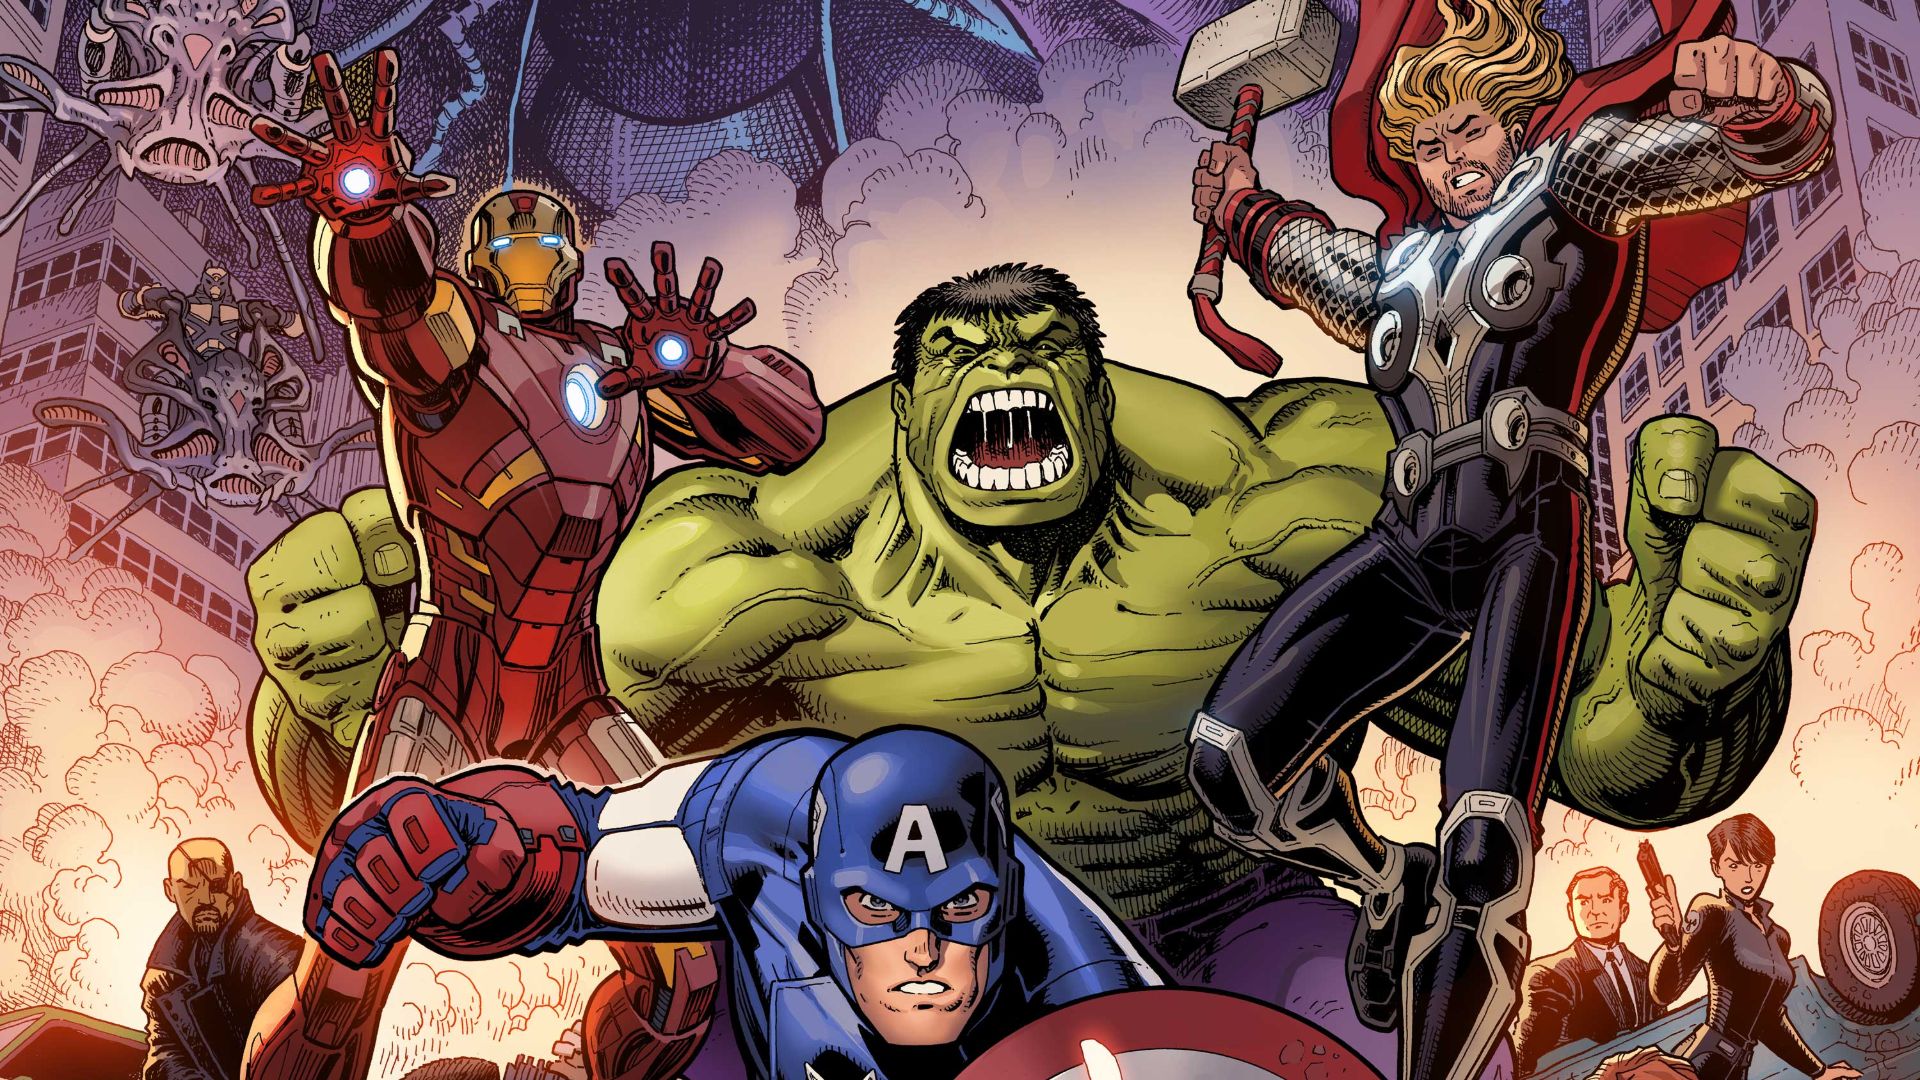 Marvel Comics pays homage to the first 6 MCU films on November variant